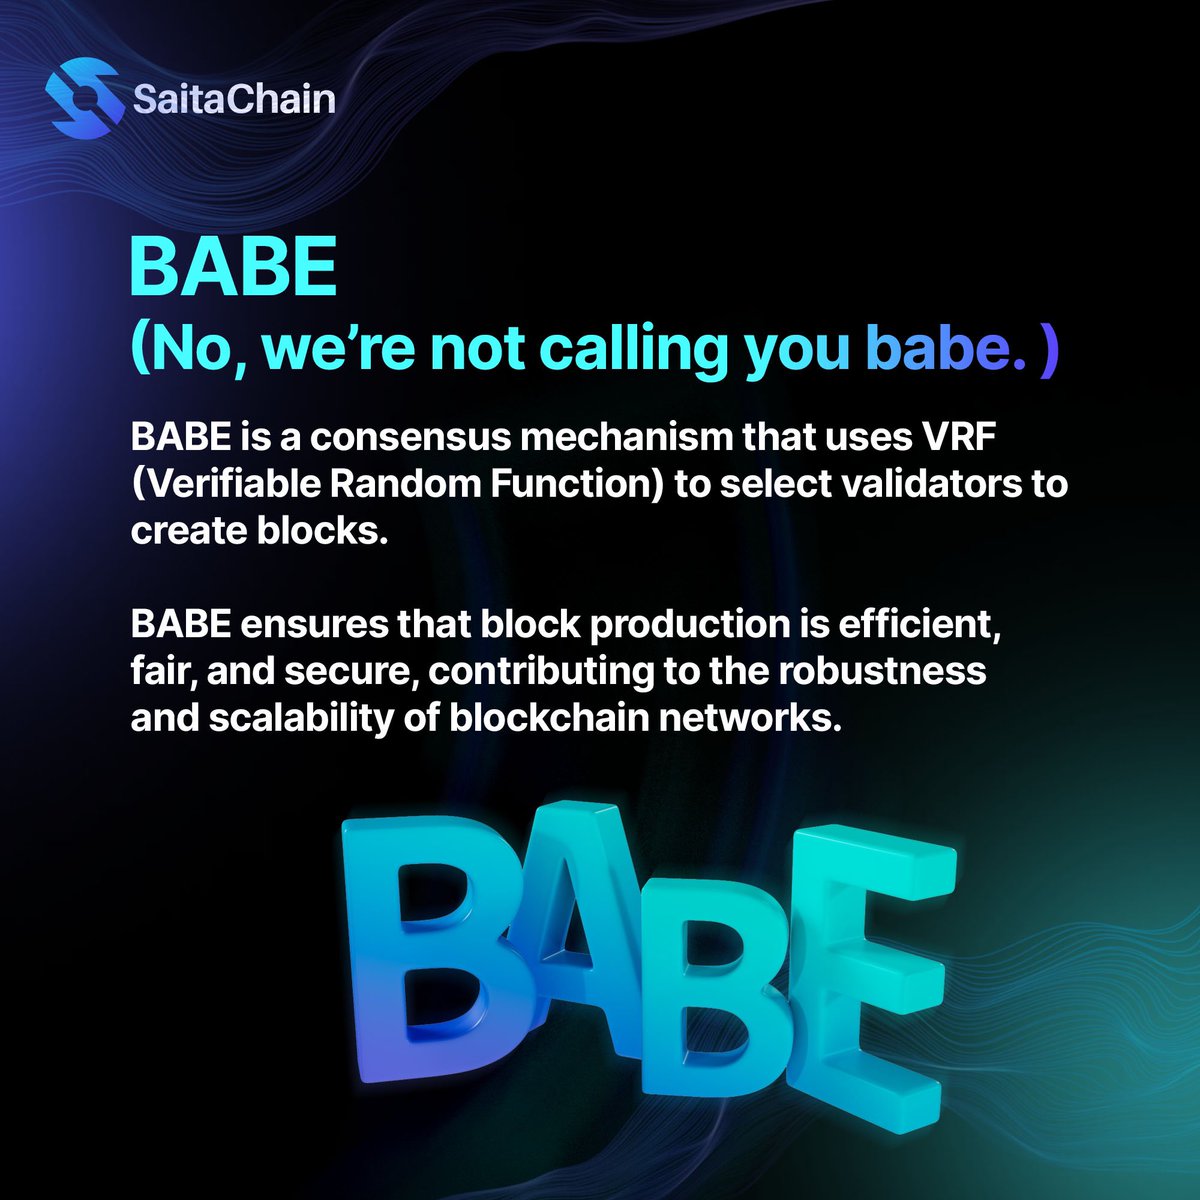 In today’s series of simplifying complex blockchain words, we’re taking you beneath the surface level, into one of the aspects of SBC’s node architecture - 
BABE (Blind Assignment for Blockchain Extension). ⛓️⚡️

Put a 🙋🏻‍♂️ in the comments if you already knew what this was!